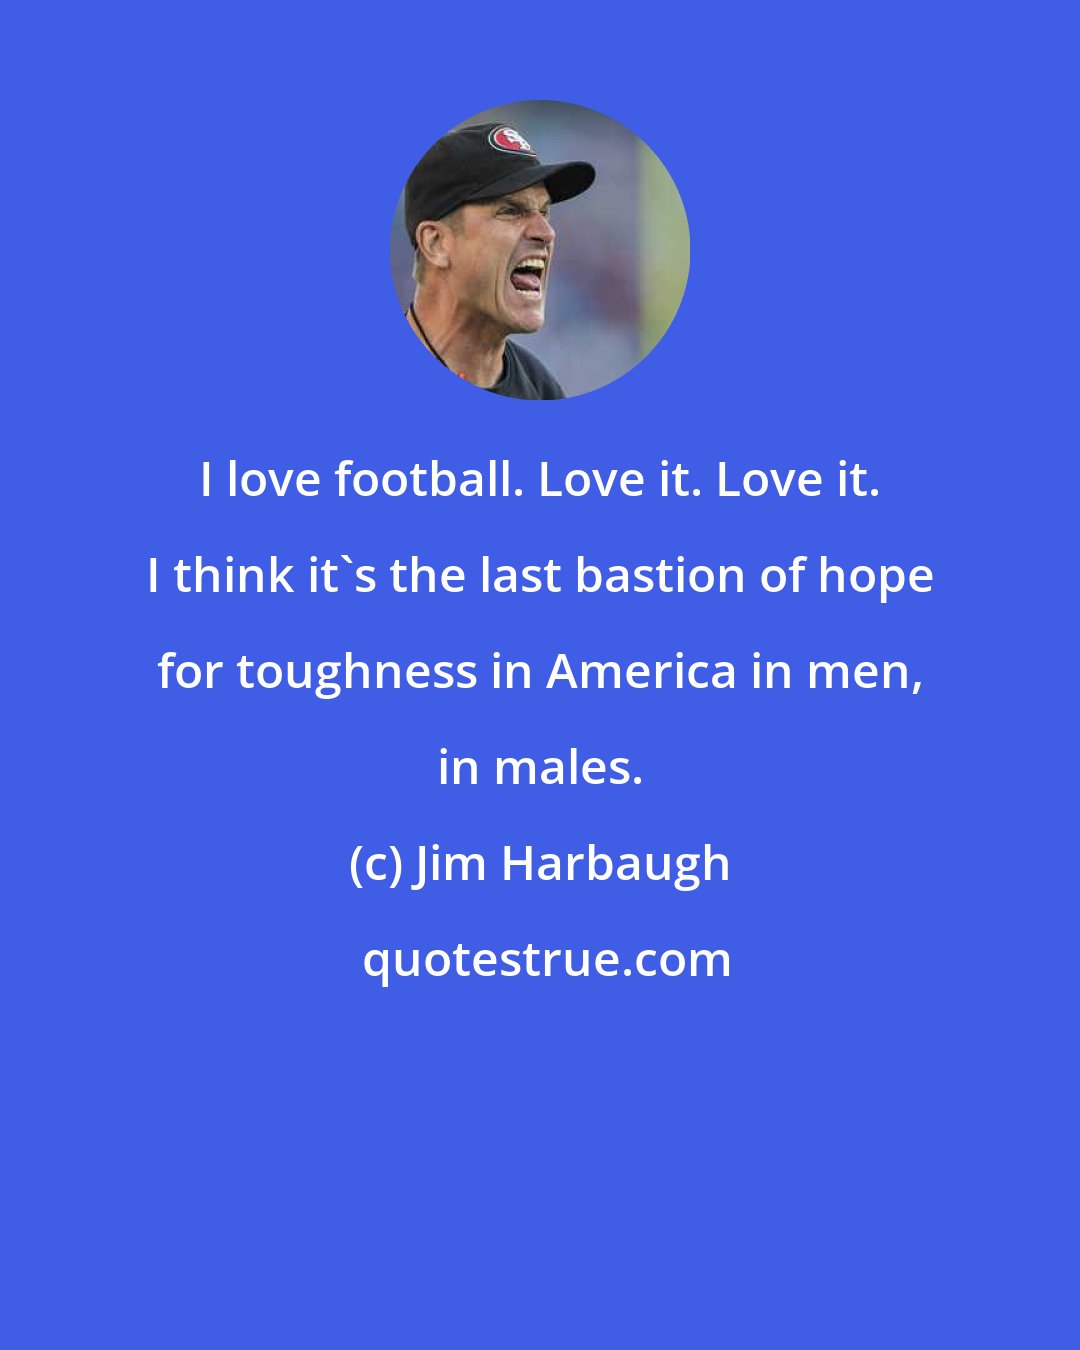 Jim Harbaugh: I love football. Love it. Love it. I think it's the last bastion of hope for toughness in America in men, in males.